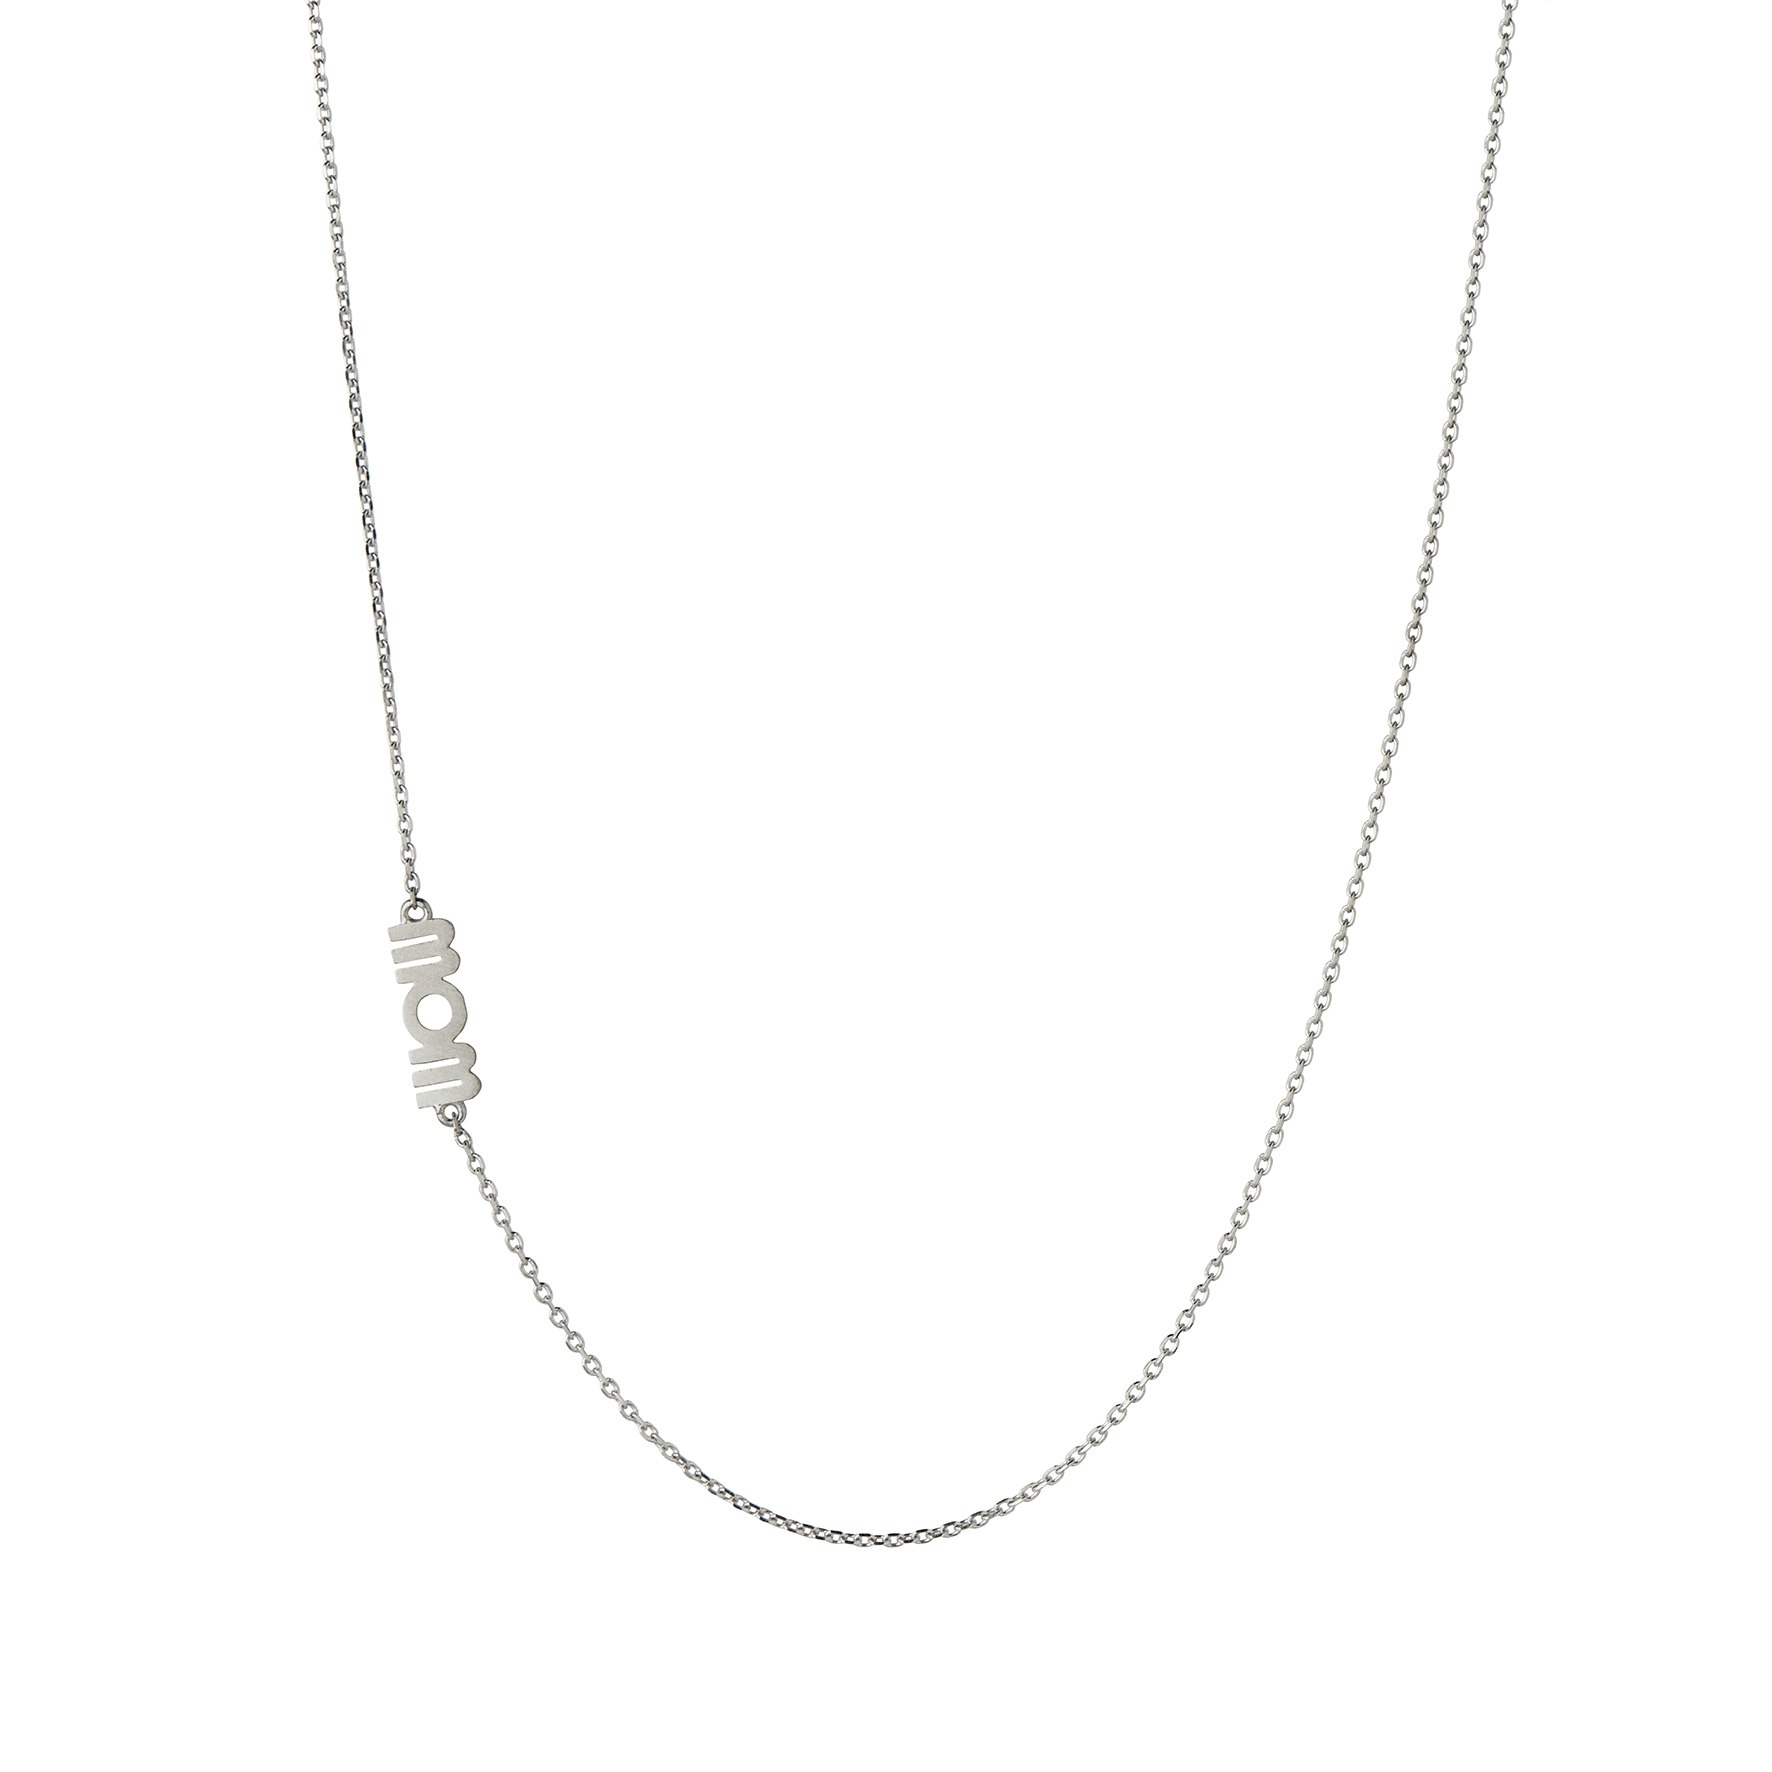 Wow Mom Necklace from STINE A Jewelry in Silver Sterling 925